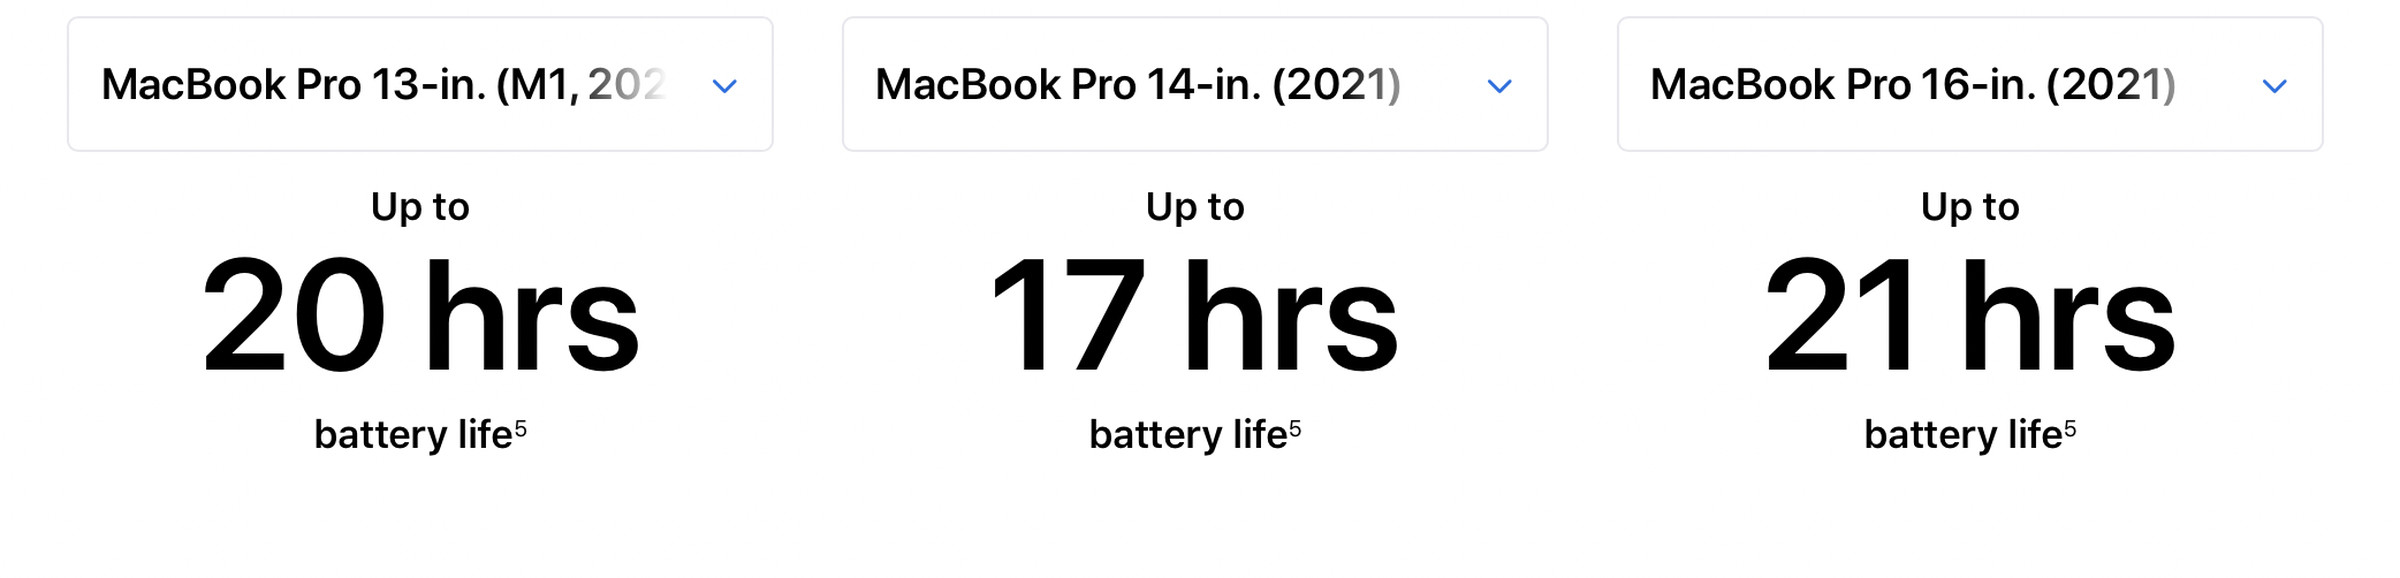 Apple quotes less runtime for the 14-inch MBP than the 13-inch one, despite the roughly 20 percent bigger battery.